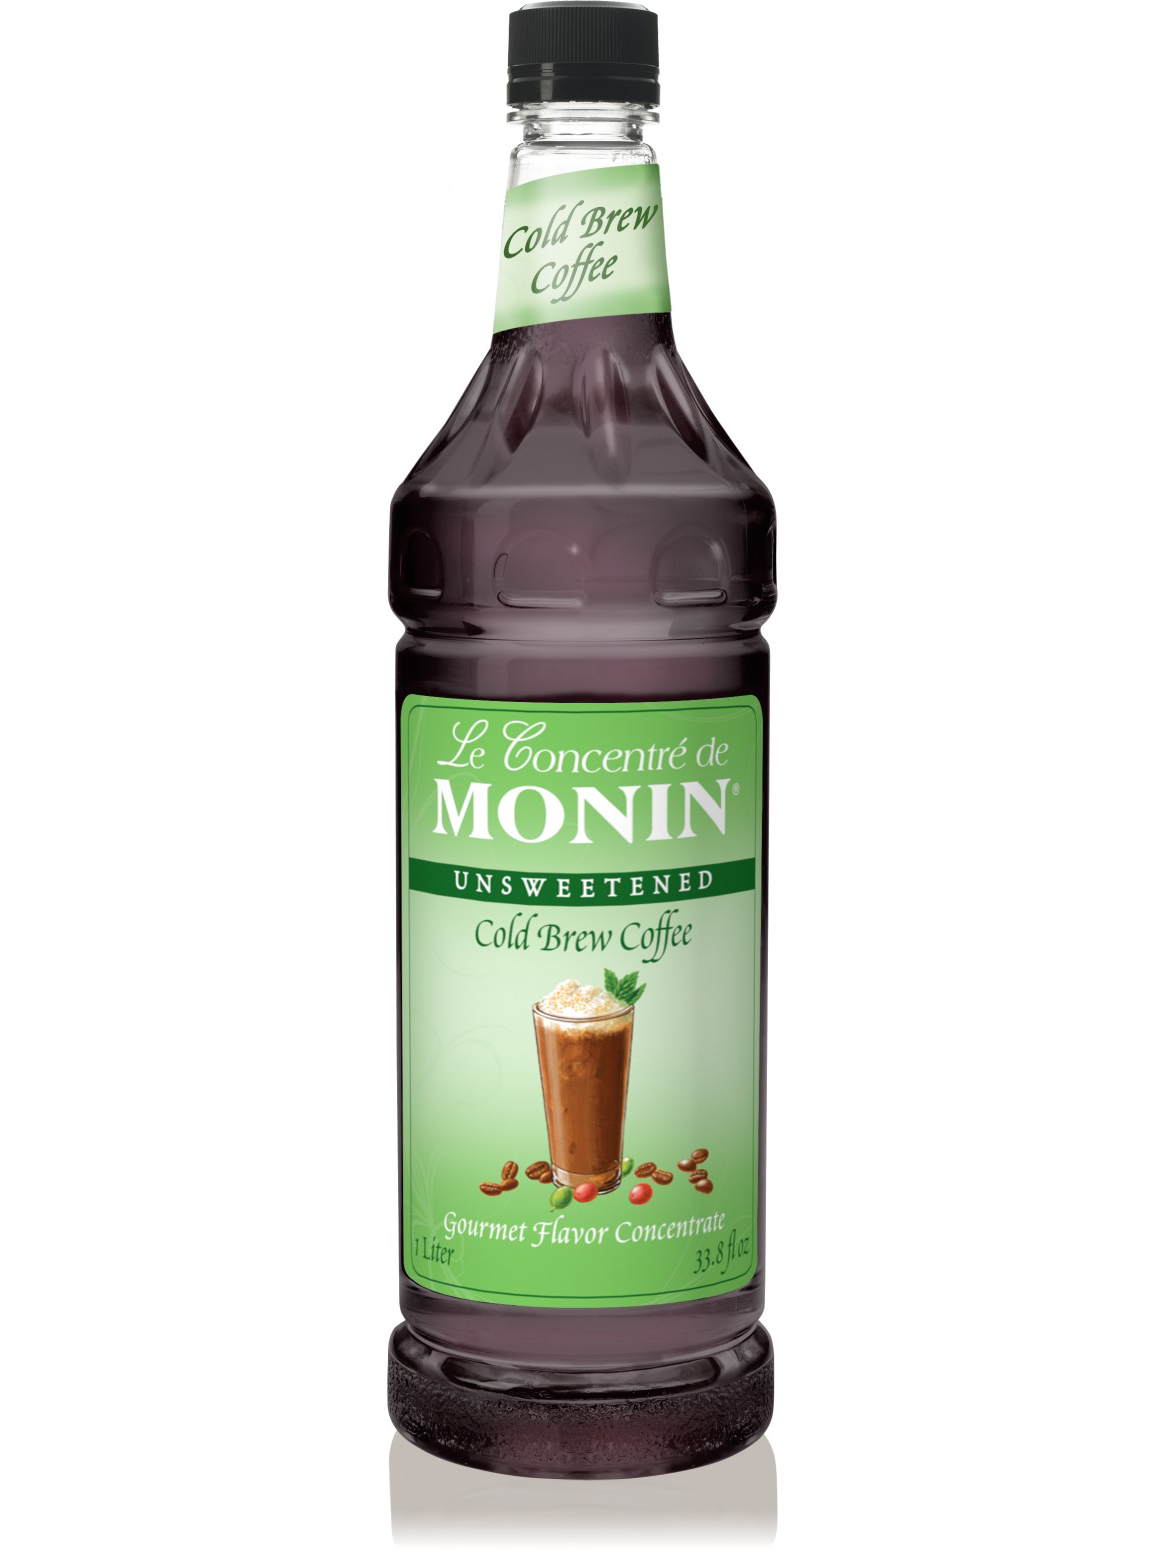 Monin Cold Brew Coffee Concentrate